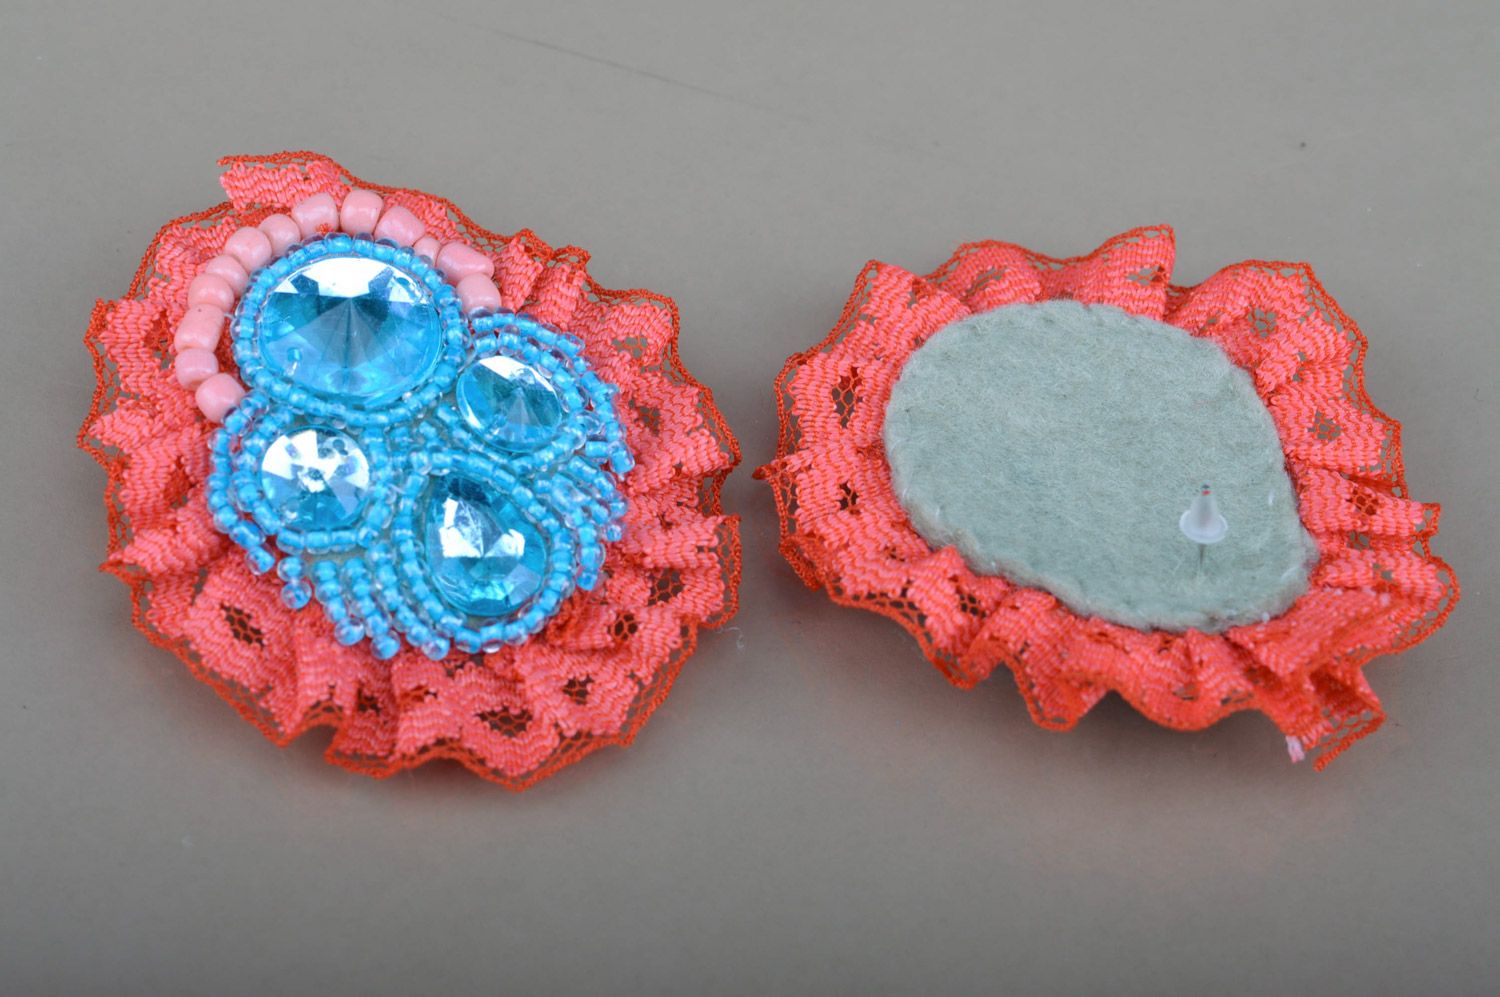 Handmade massive beaded earrings with stones and lace of red and blue colors photo 2